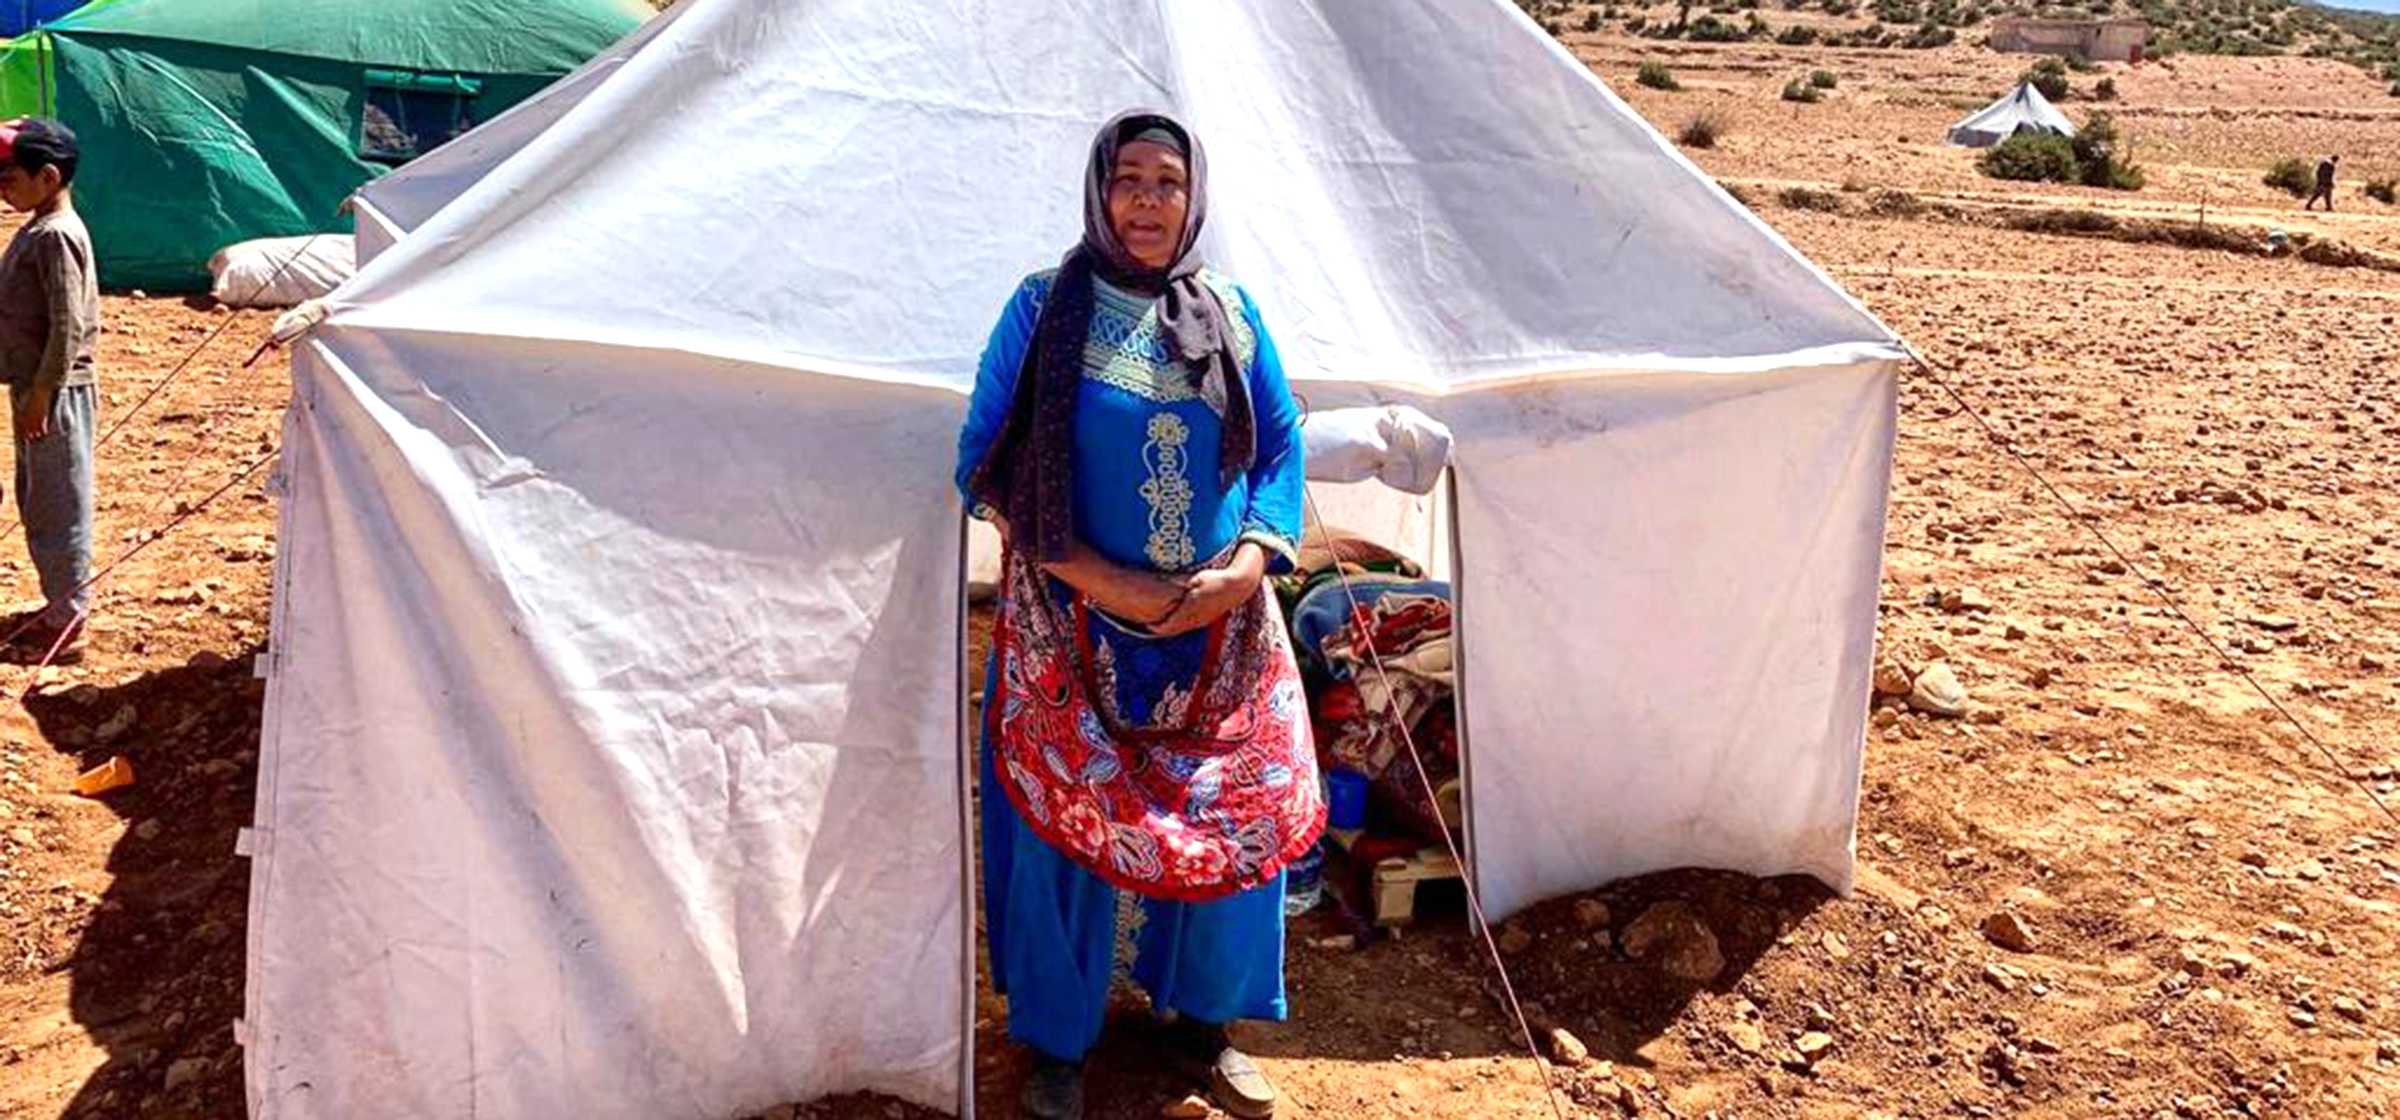 Aisha-61-with-her-new-tent-Taoukarte.jpg